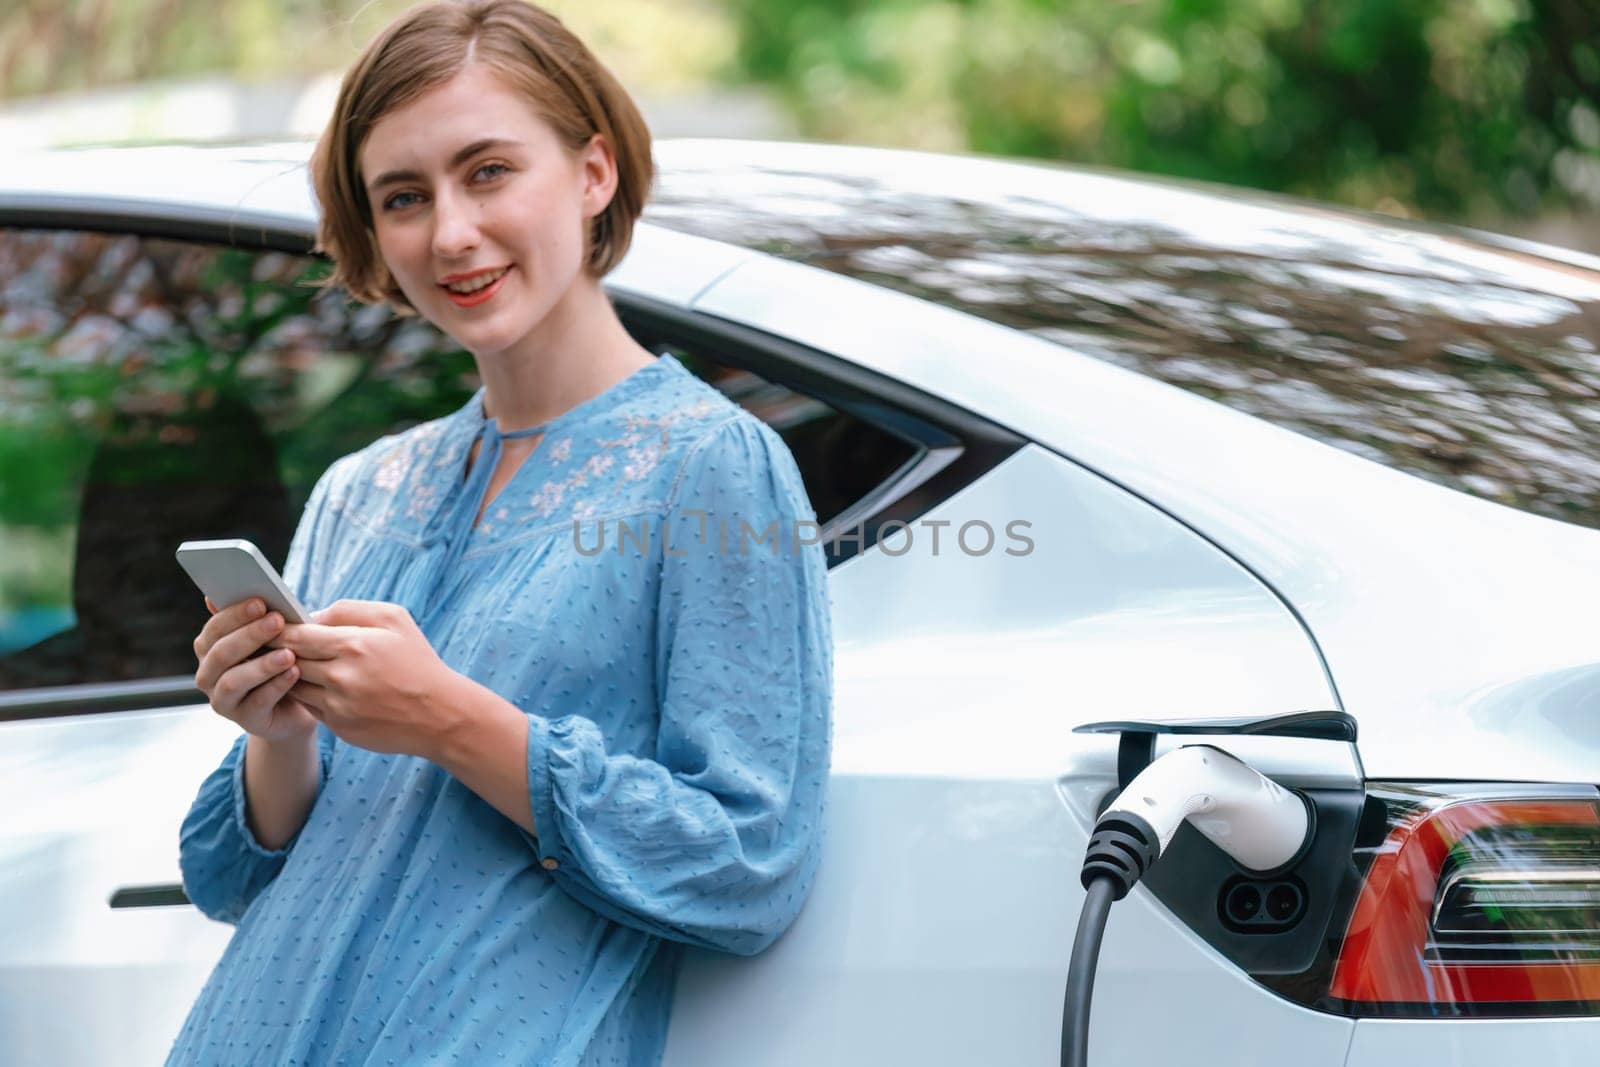 Holiday road trip vacation by the green countryside nature with beautiful young woman checking battery status from smartphone while recharging electric vehicle.Eco-friendly travel wit EV car.Perpetual